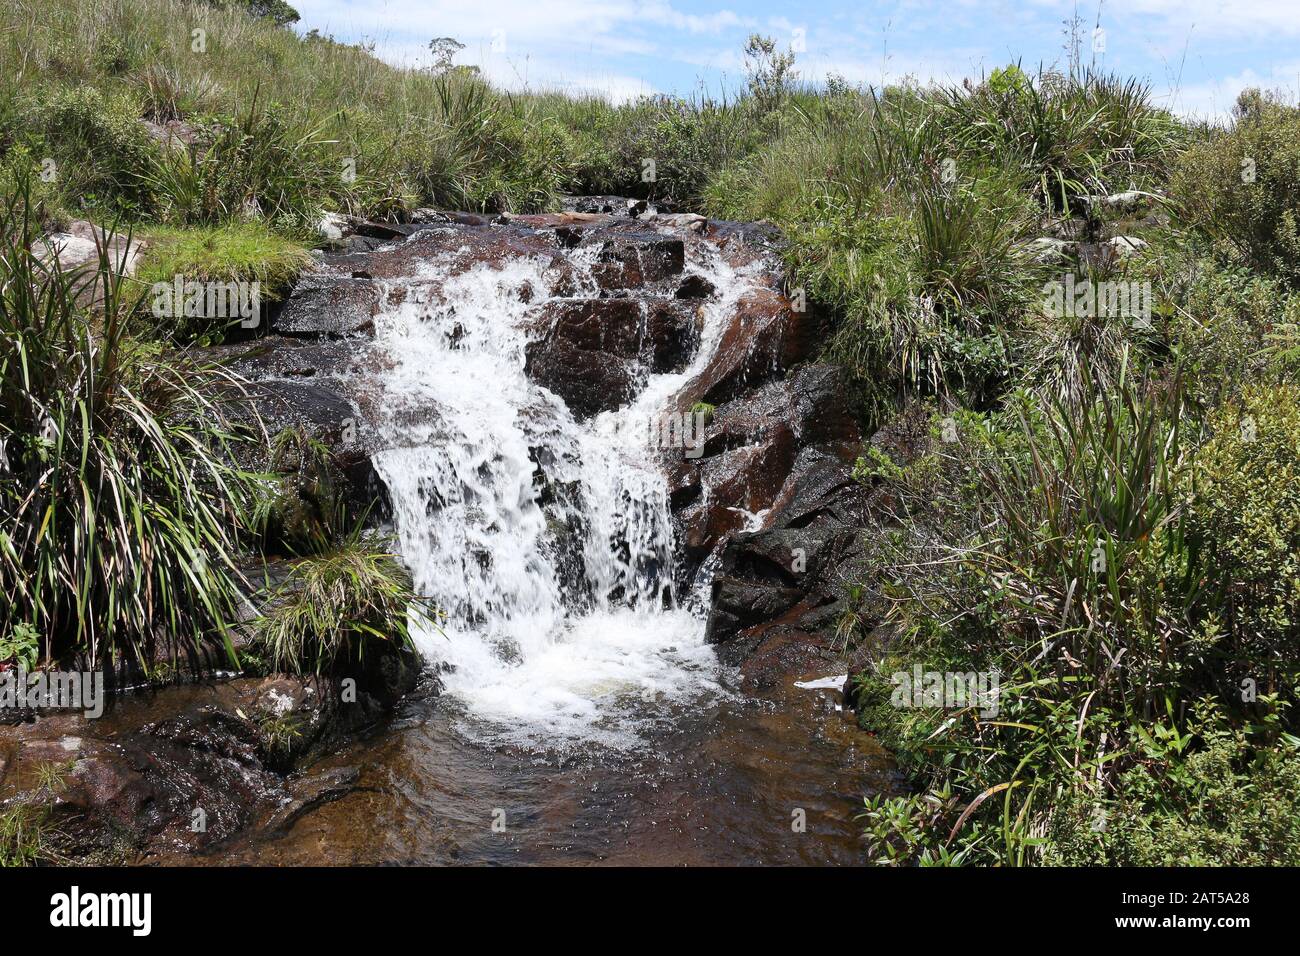 The small waterfalls formed in the fields. Untouched beauty. Stock Photo